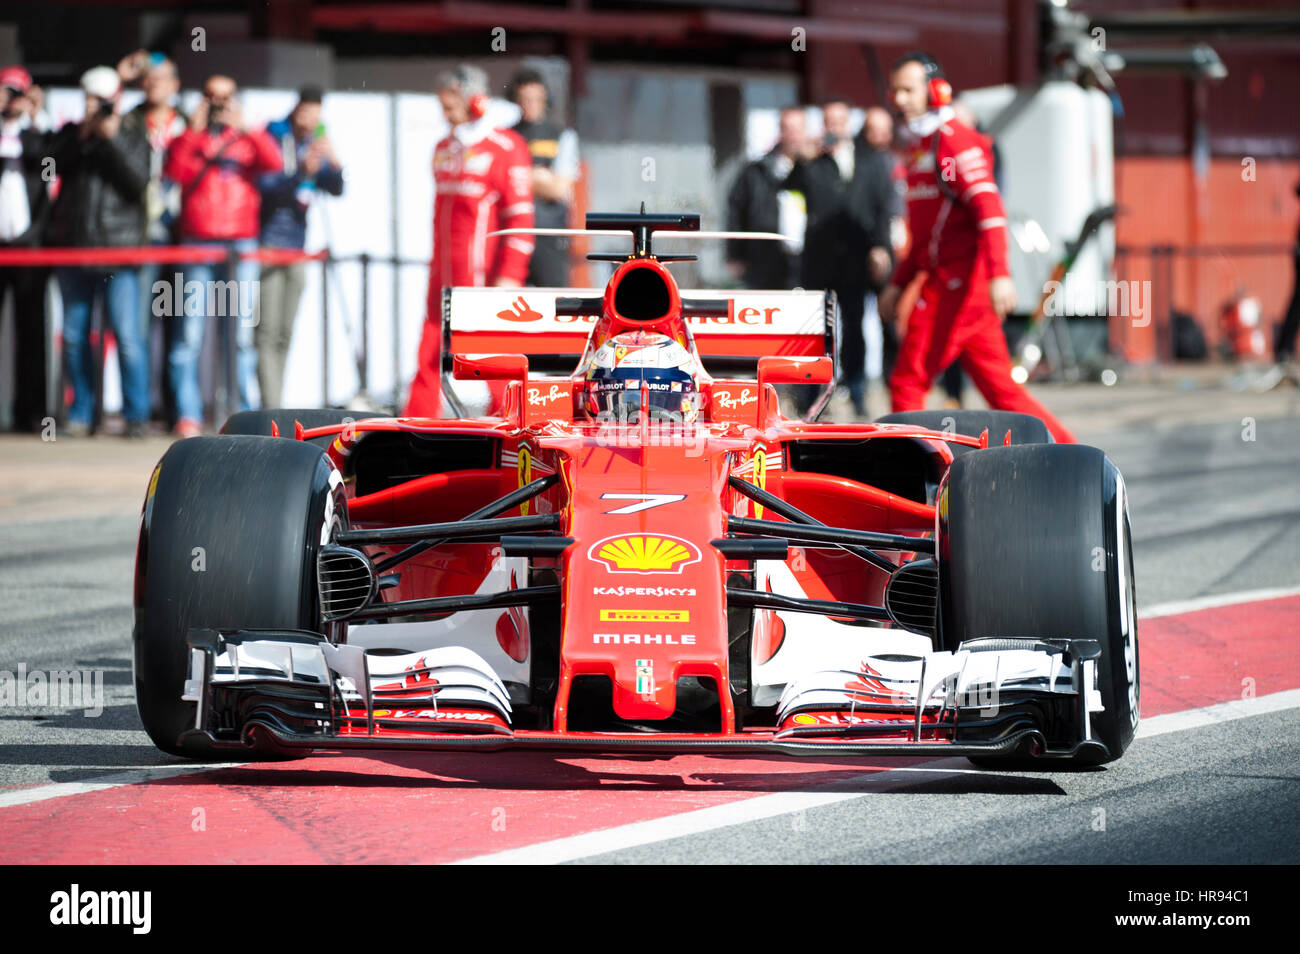 Montmeló, Spain. 28th Feb, 2017. Kimi Raikkonen, driver of the Ferrari Team  in action during the 2nd day of the Formula 1 Test at the Circuit of  Catalunya. Credit: Pablo Freuku/Pacific Press/Alamy